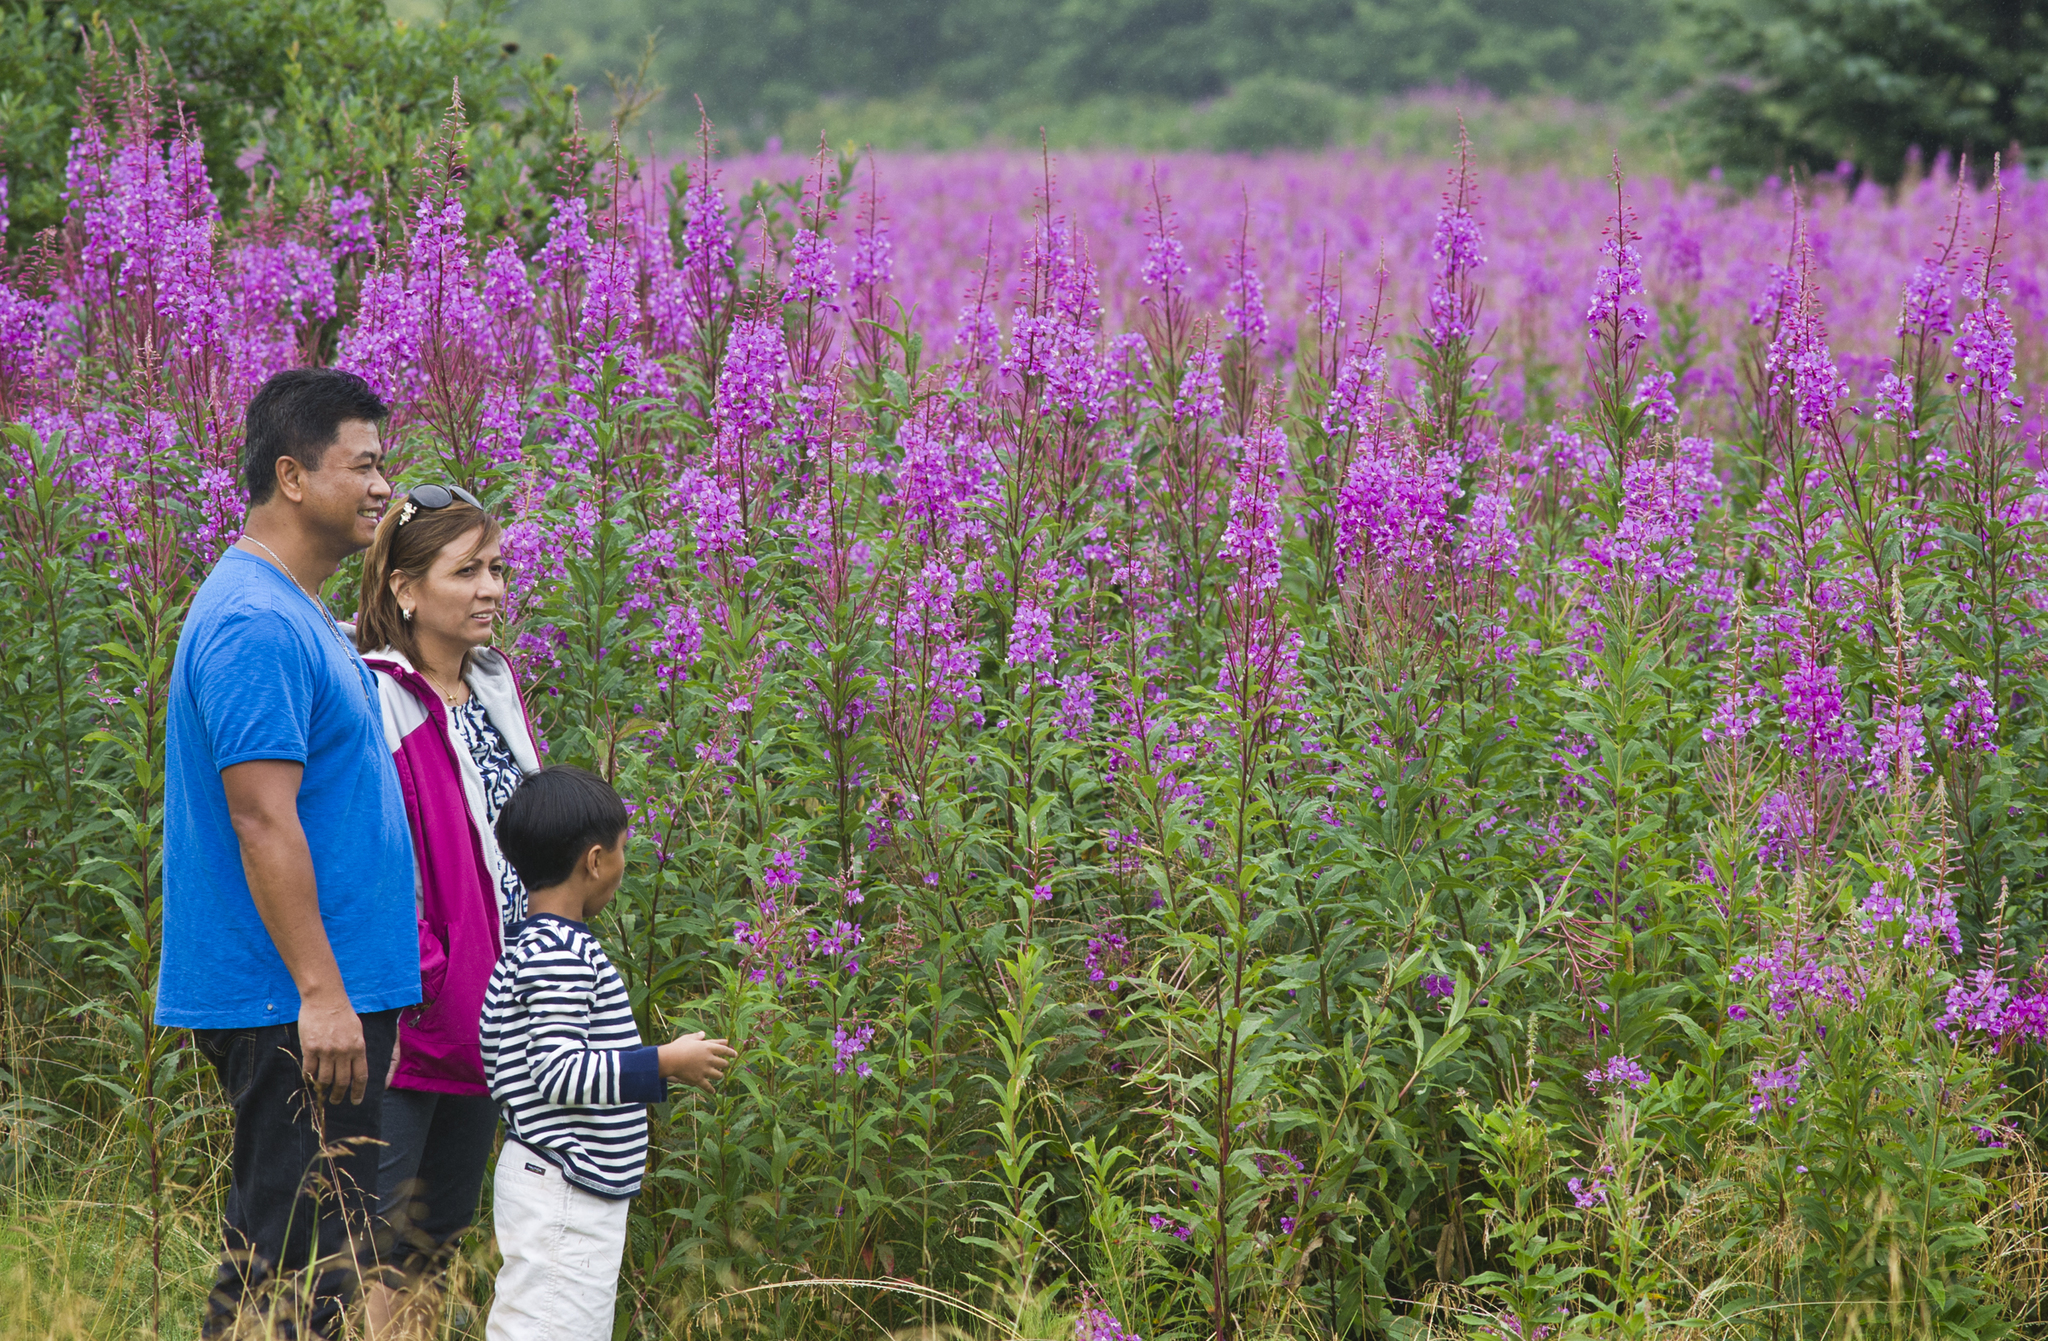 Michael Penn | Juneau Empire Gerald and Azela Guzman with their son, Gerald Jr., 8, stop to admire the field of fireweed near the Juneau International Airport.